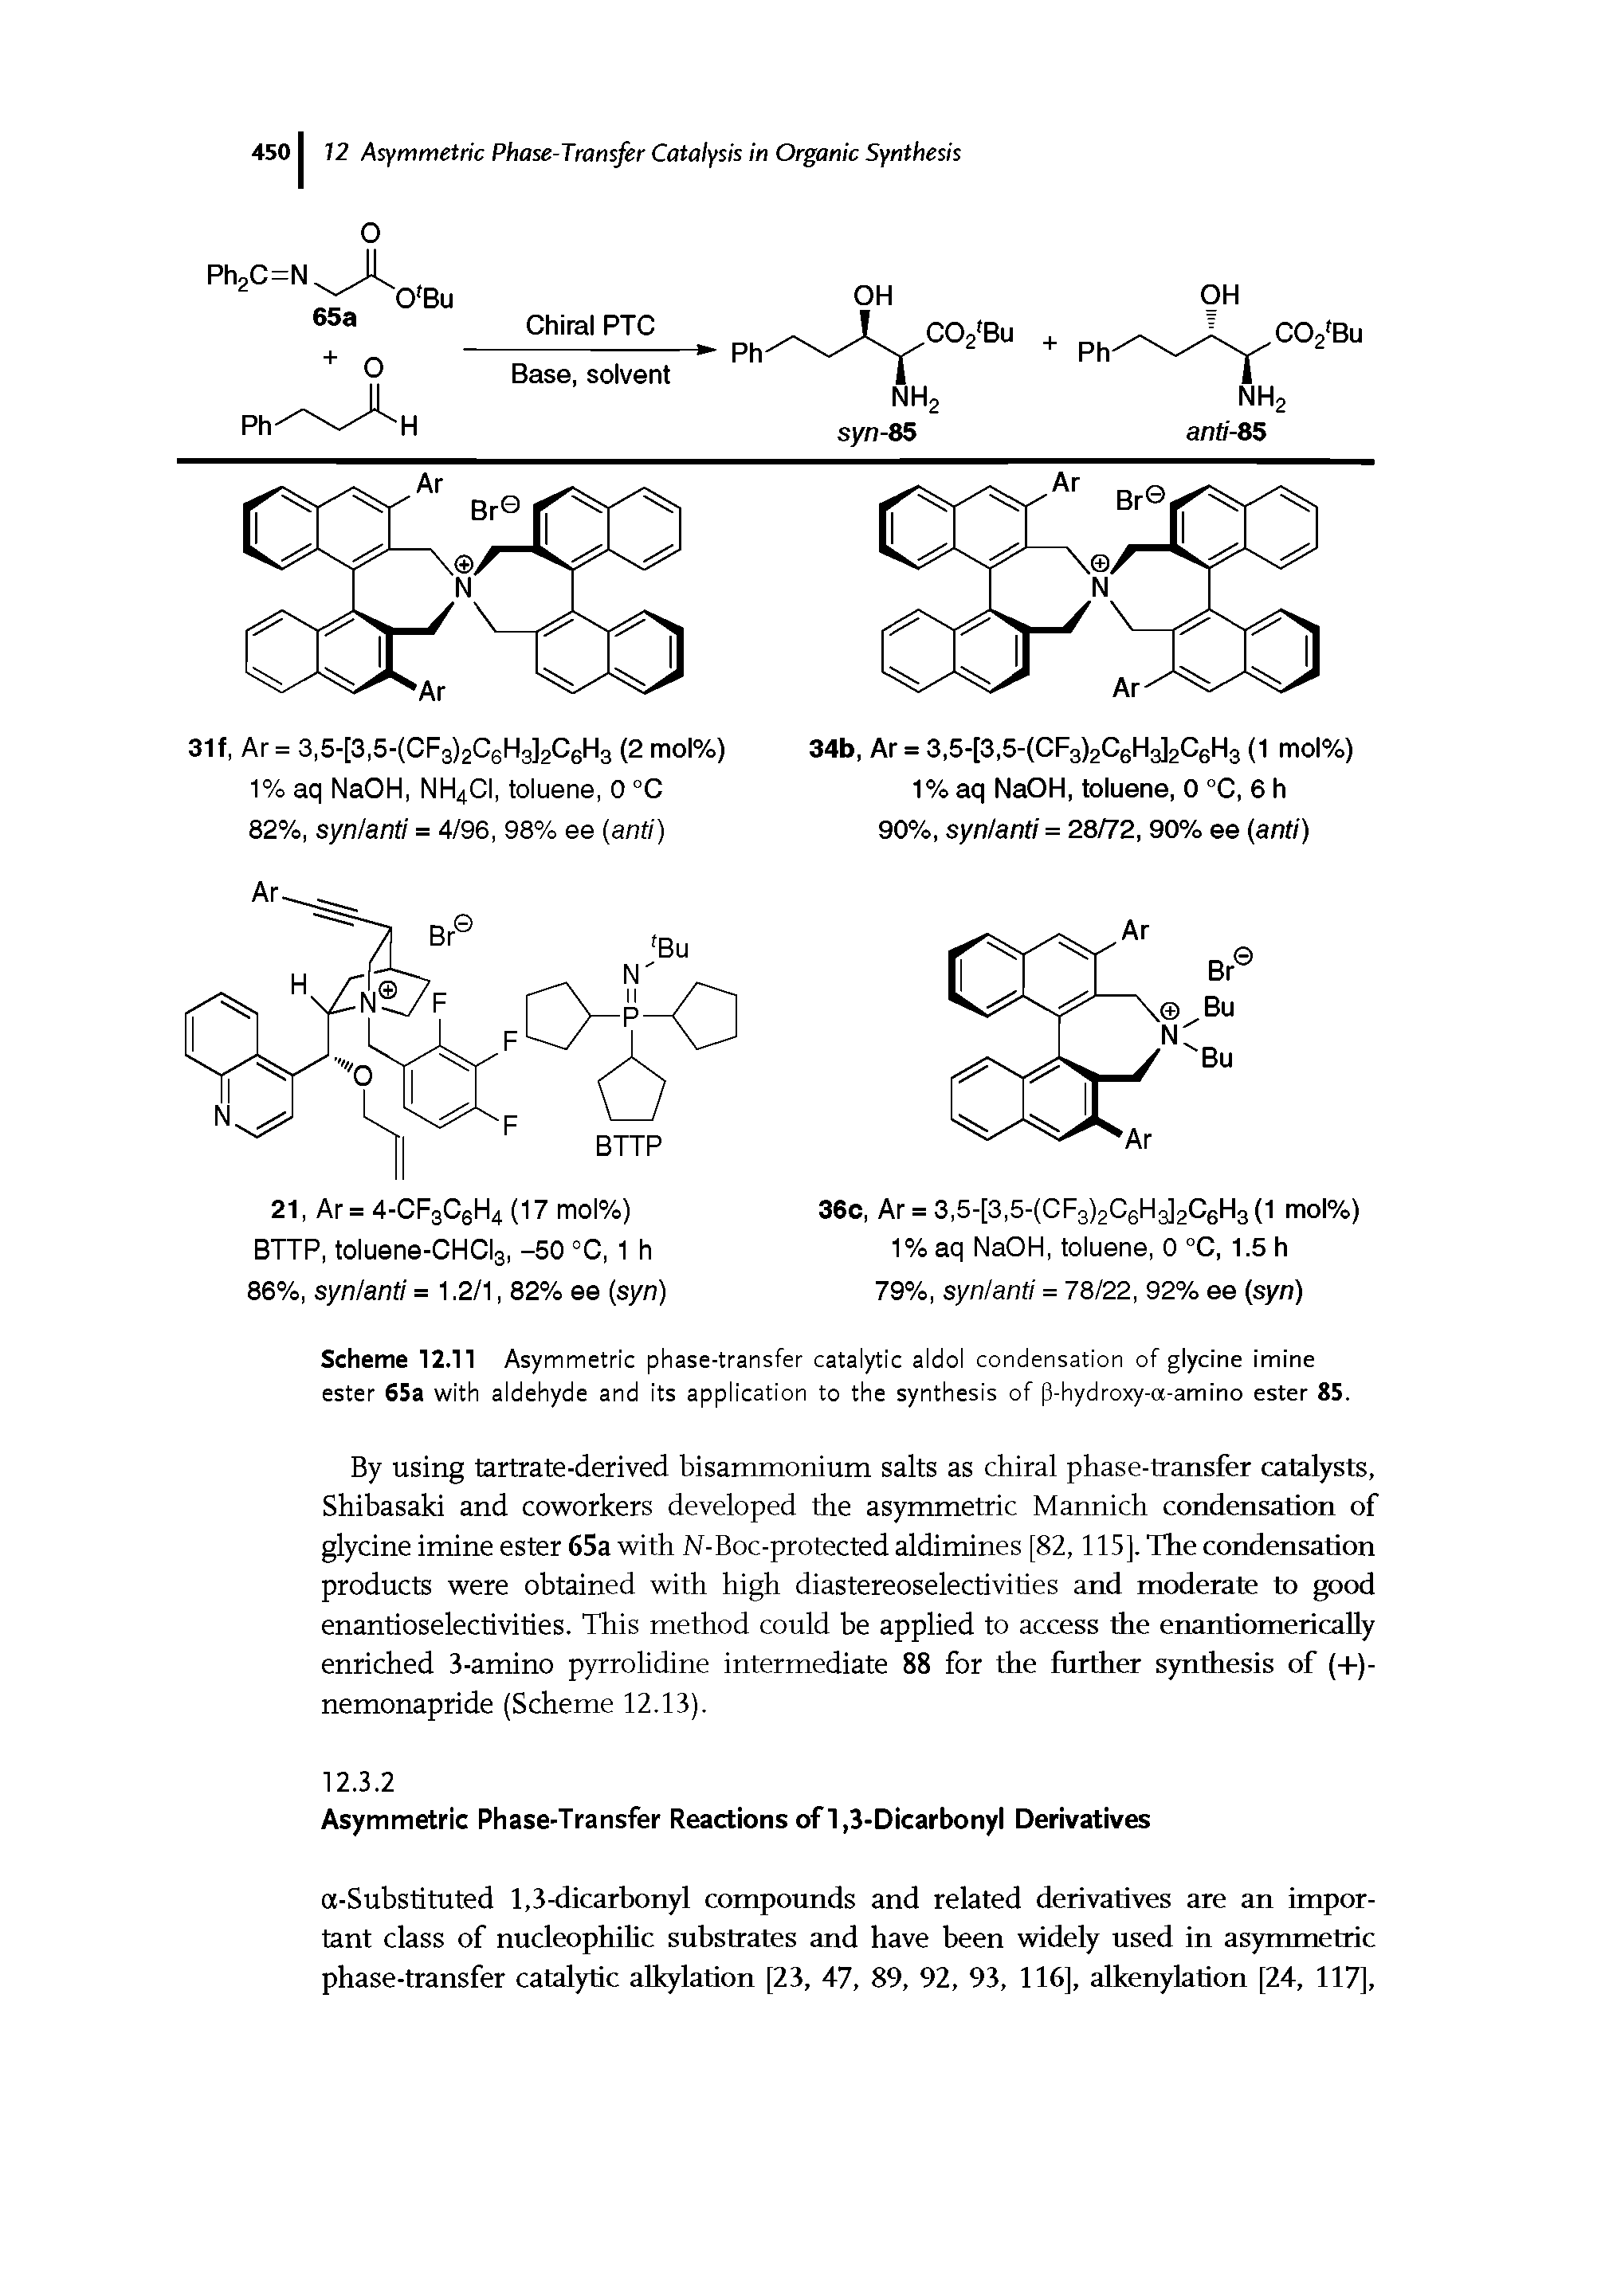 Scheme 12.11 Asymmetric phase-transfer catalytic aldol condensation of glycine imine ester 6Sa with aldehyde and its application to the synthesis of p-hydroxy-a-amino ester 85.